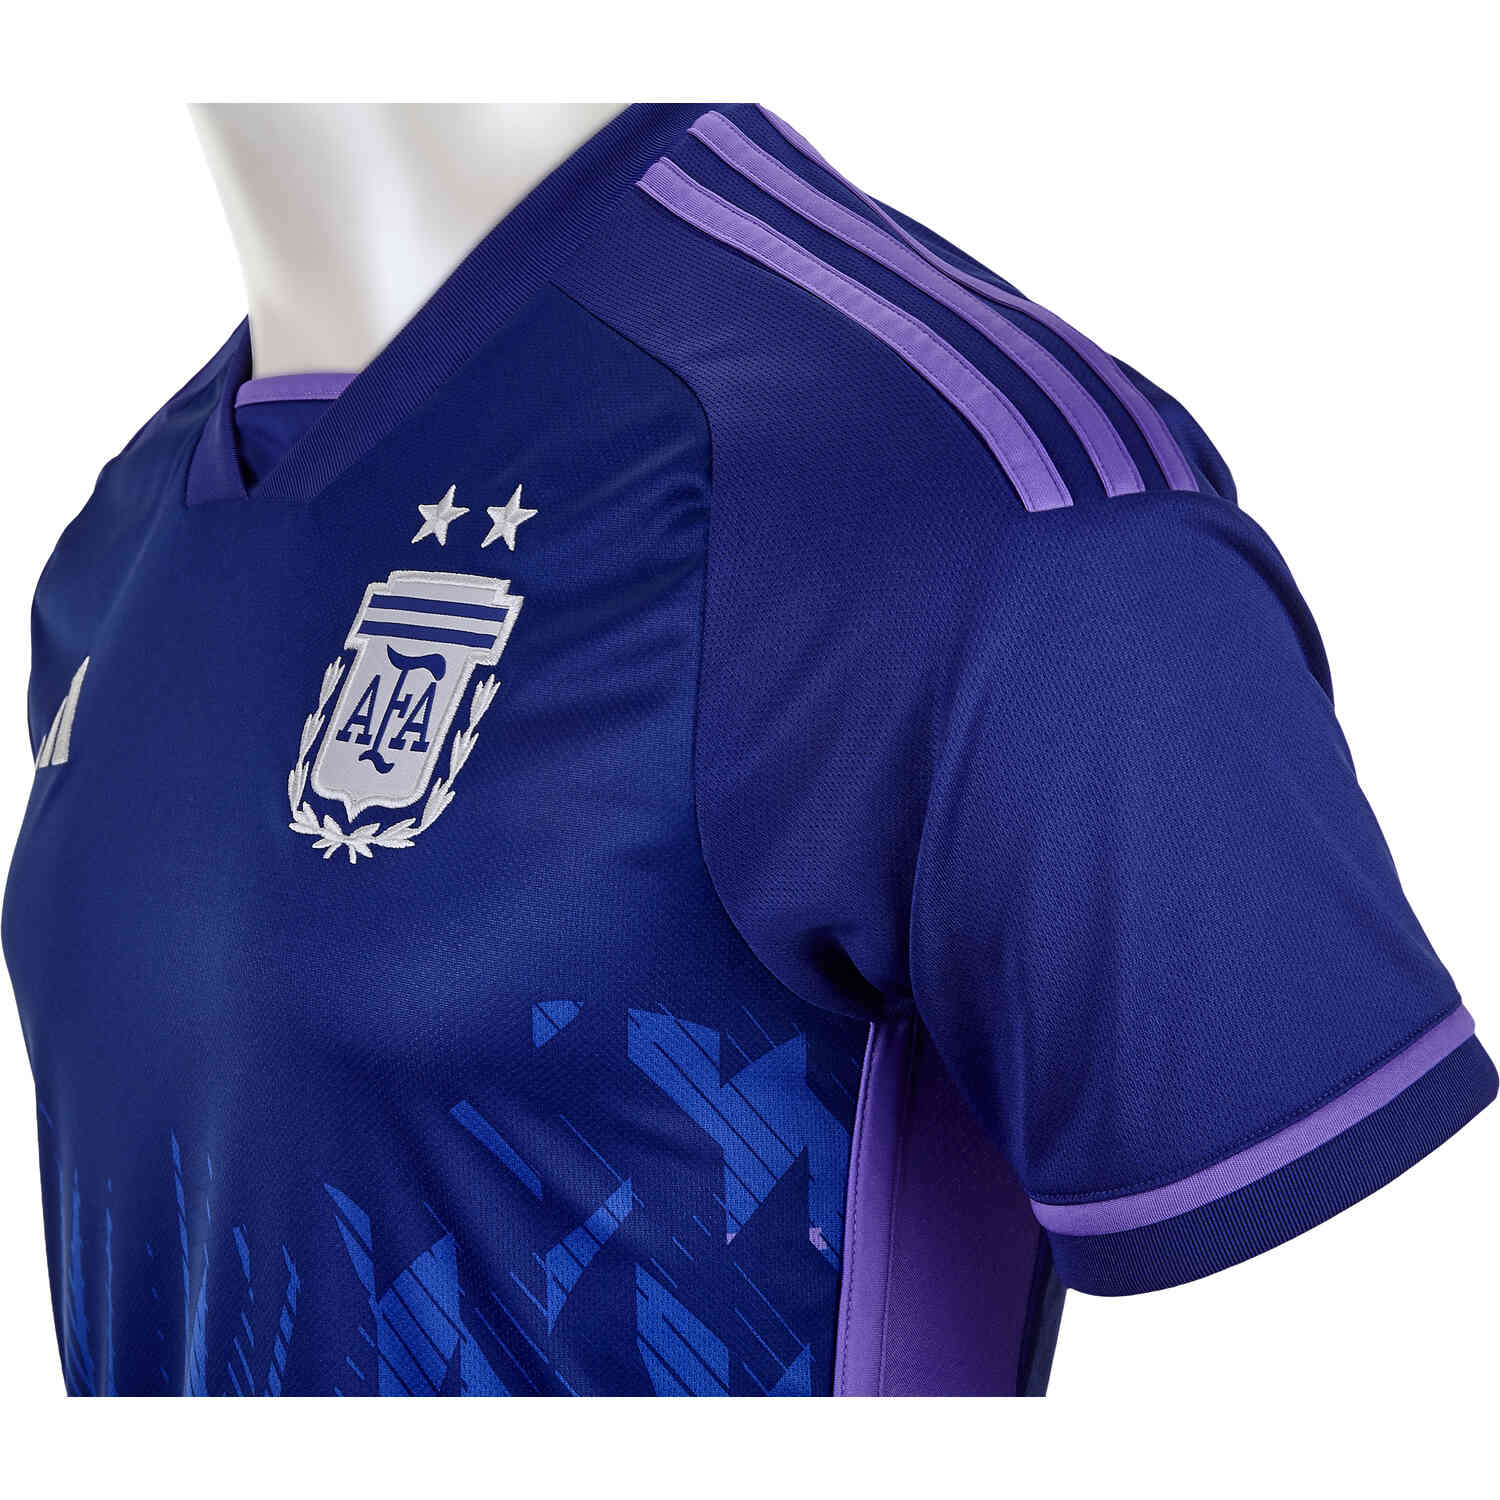 2022 adidas Argentina Home Authentic Jersey - SoccerPro